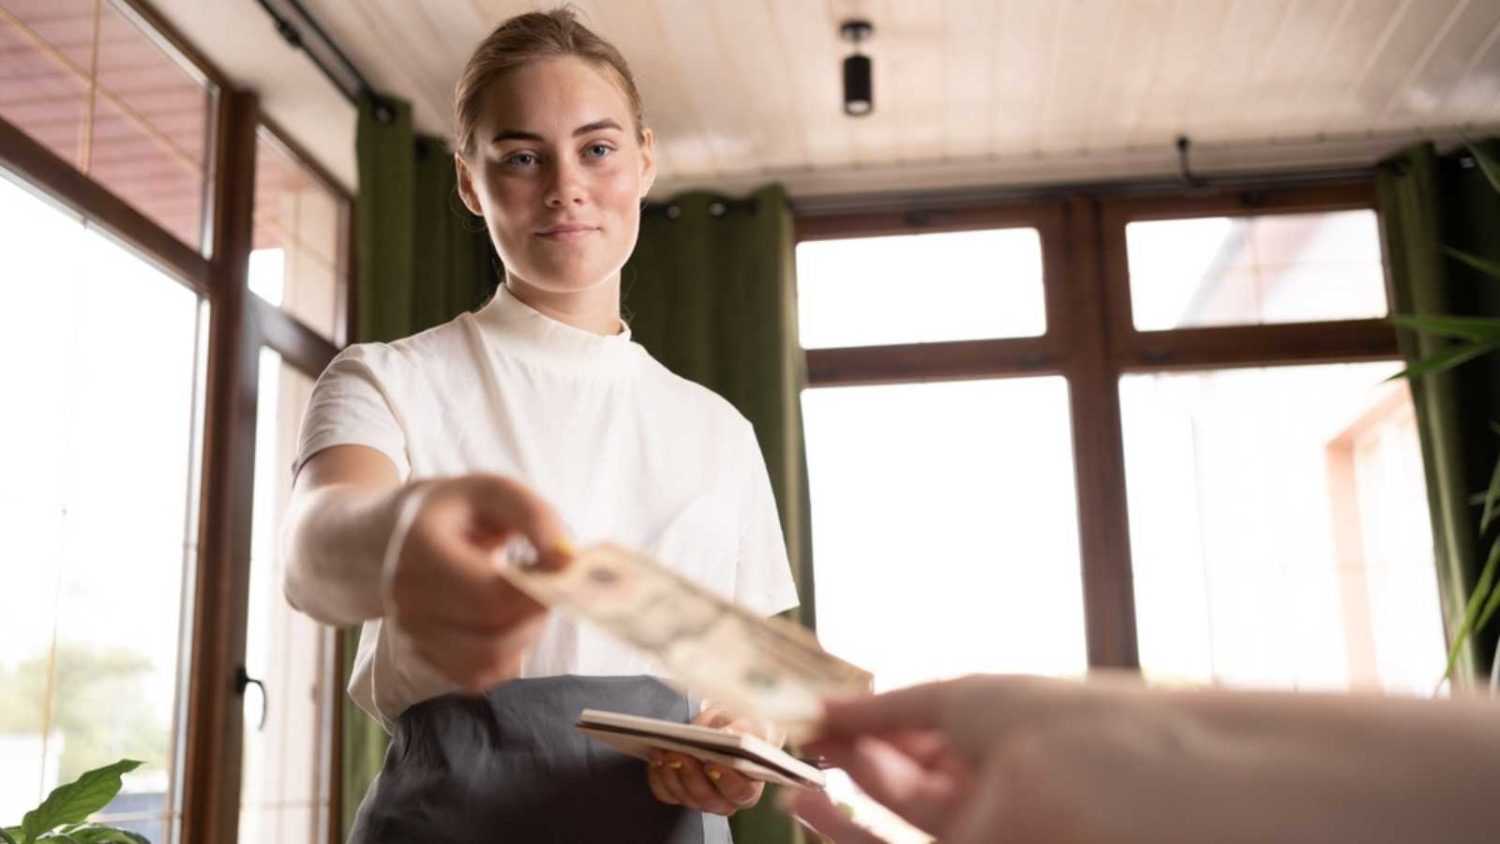 Waitress getting tipped